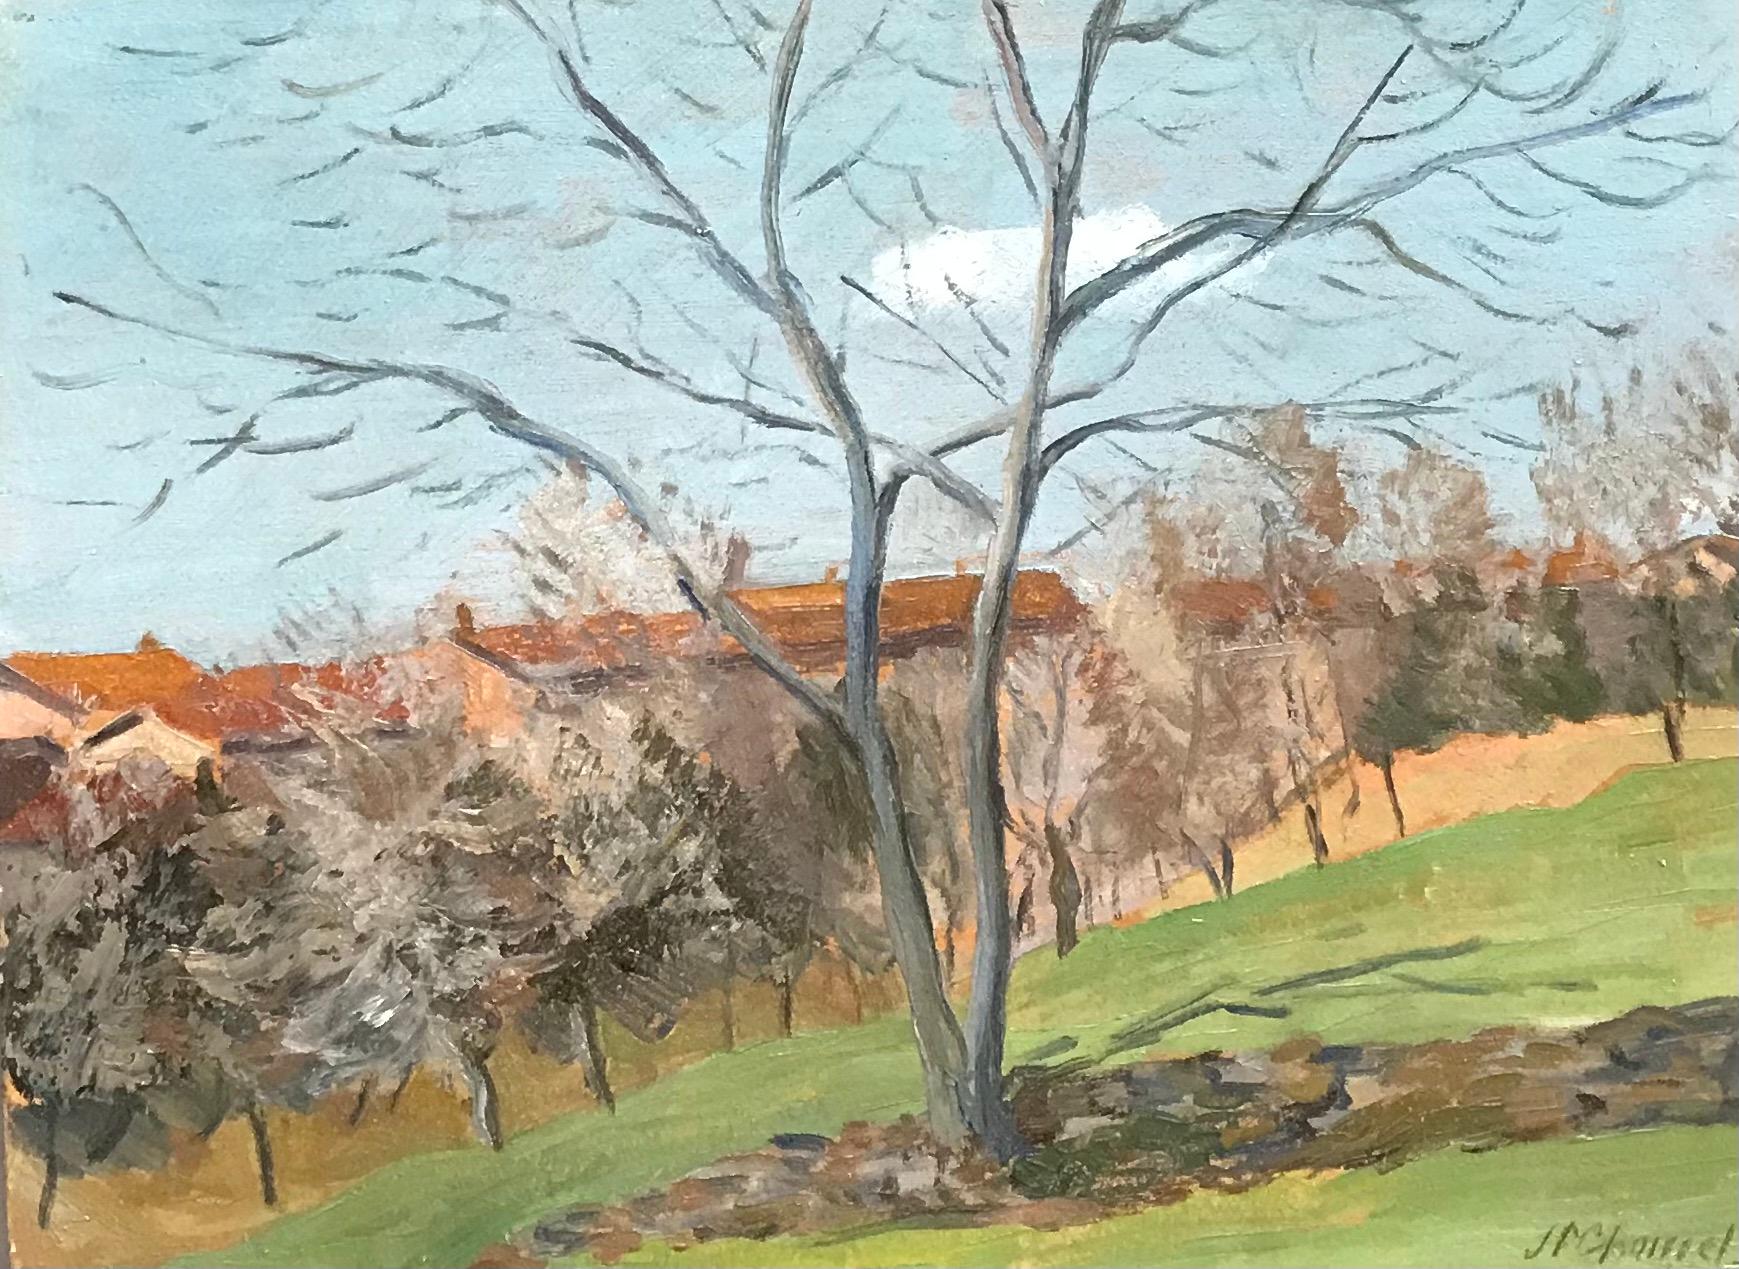 The bare tree Italy by Jean Chomel - Oil on wood 27x35 cm